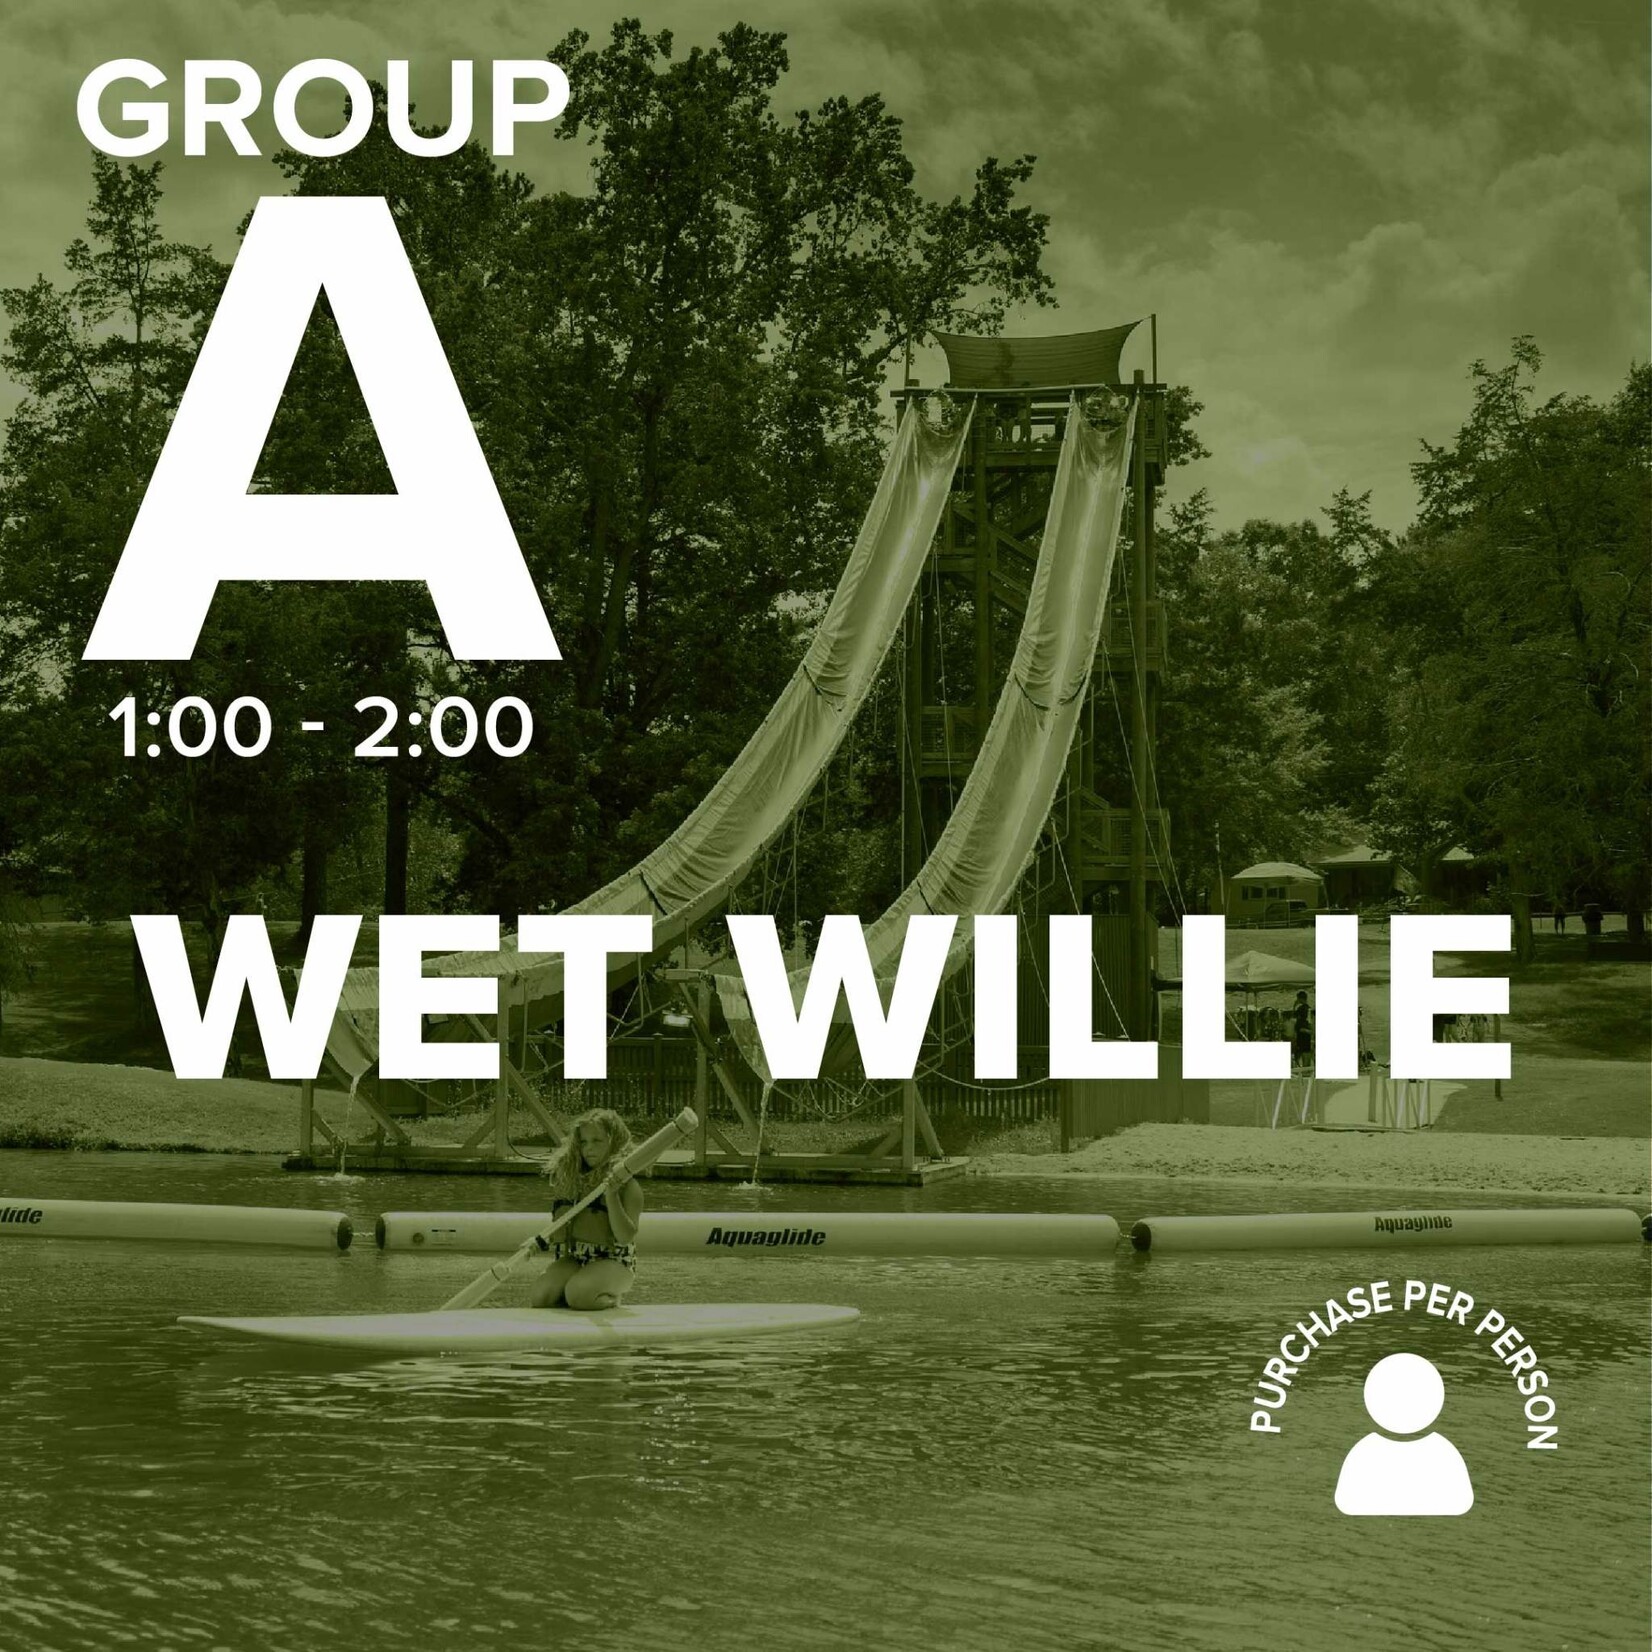 2024 Student Life Youth Camp 2 June 3-June 7 Wet Willie Arm Band SLY2 2024 THURSDAY 1pm - 2pm GROUP A